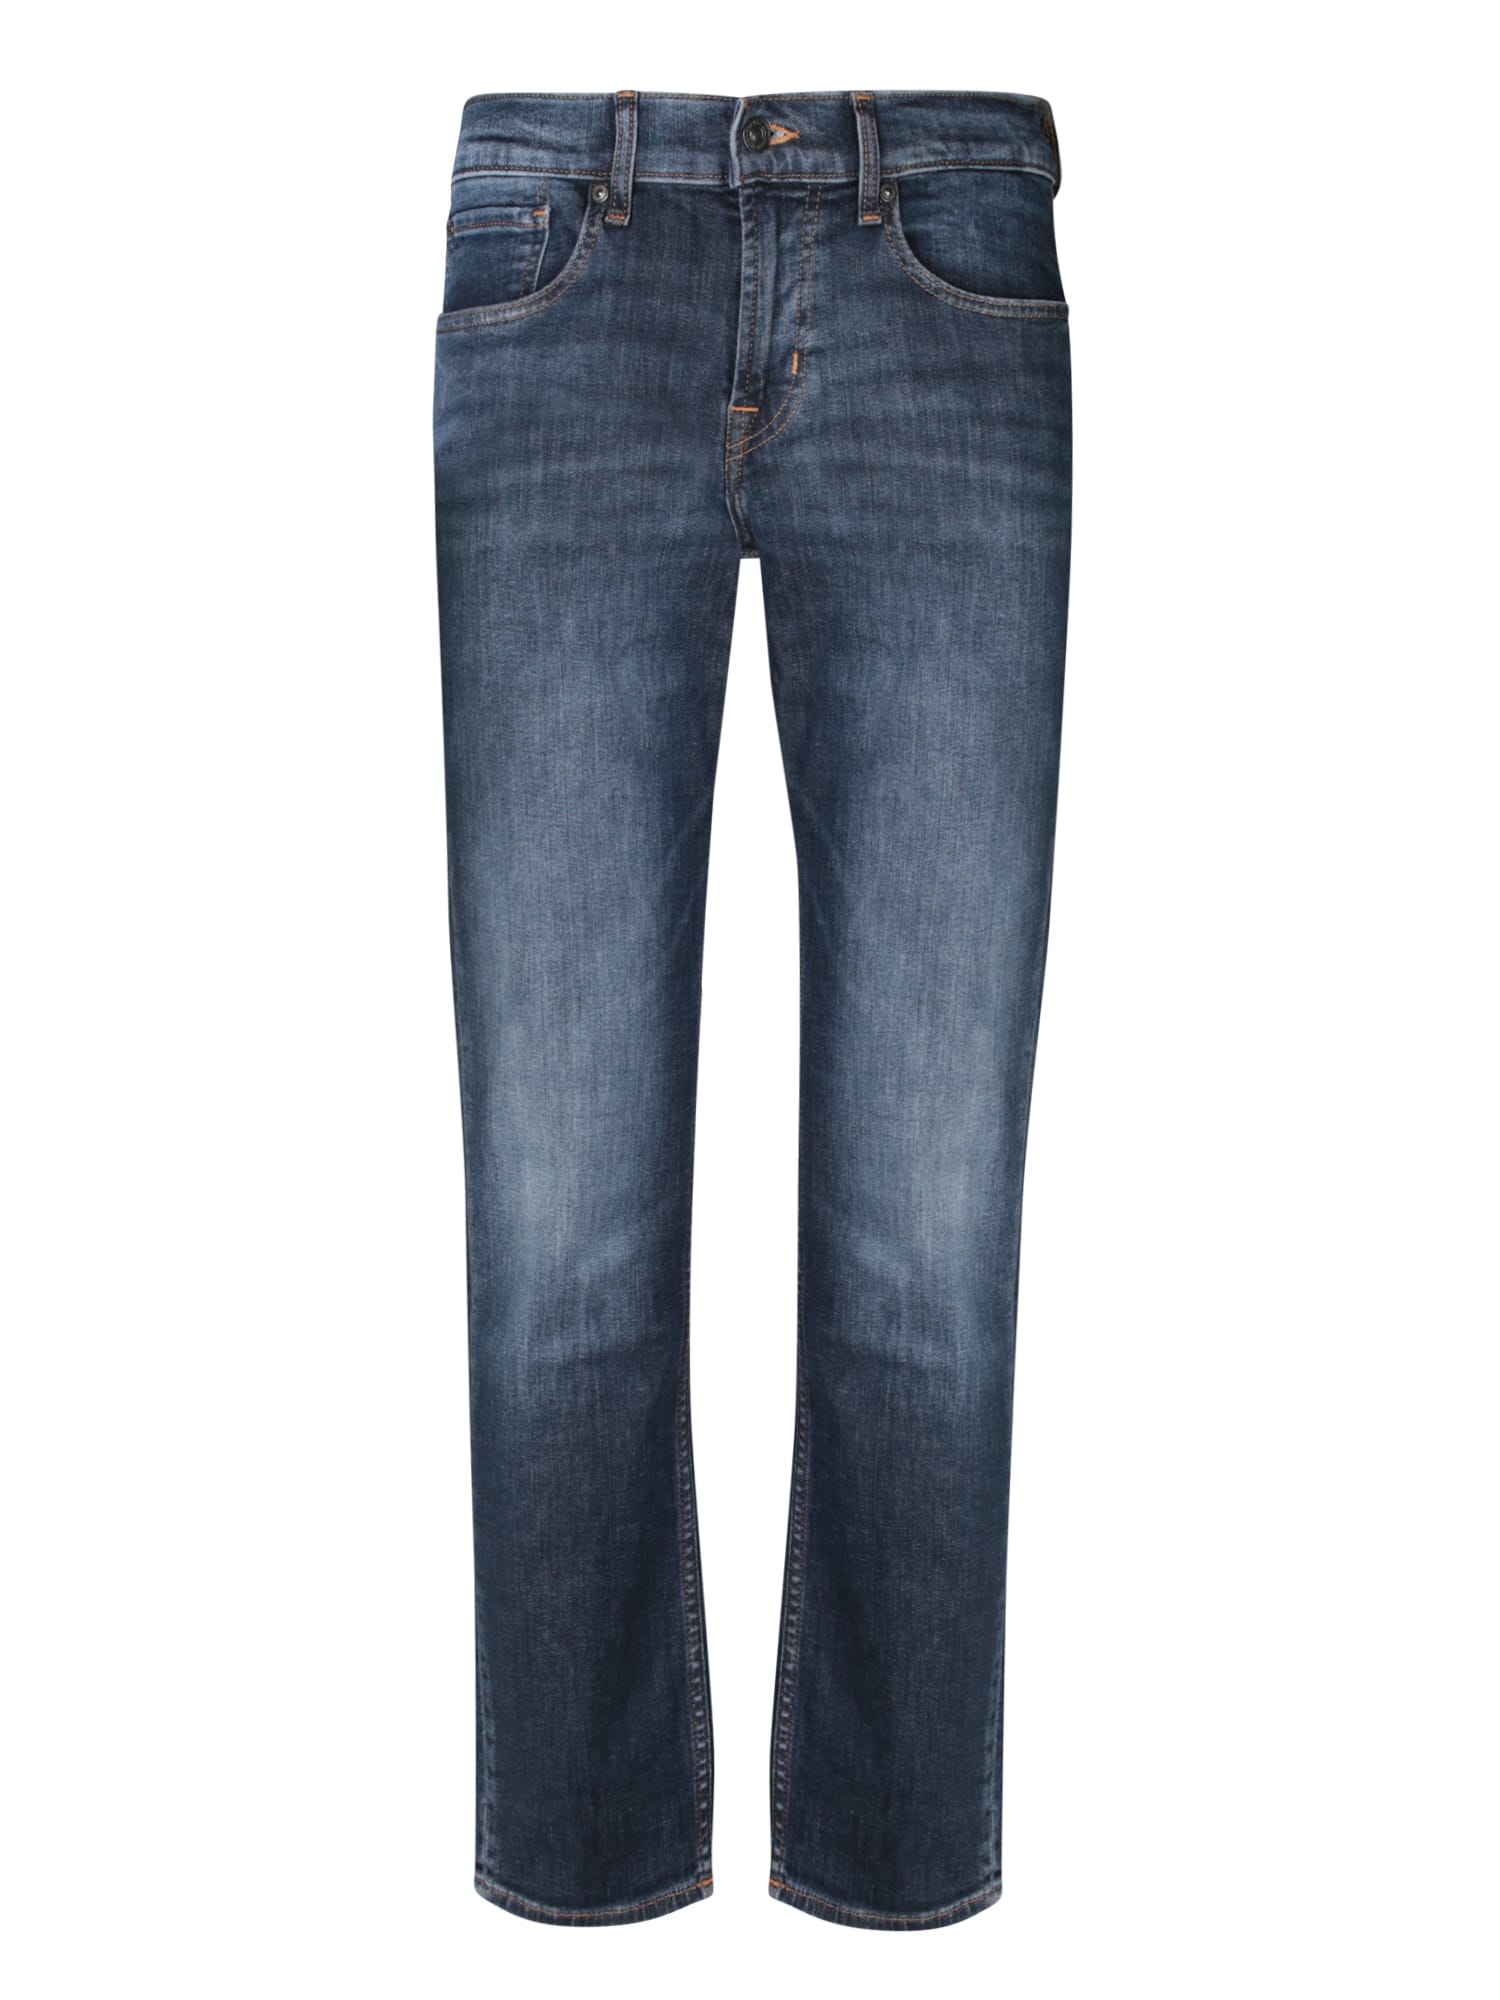 Shop 7 For All Mankind Slimmy Tapered Dark Blue Jeans